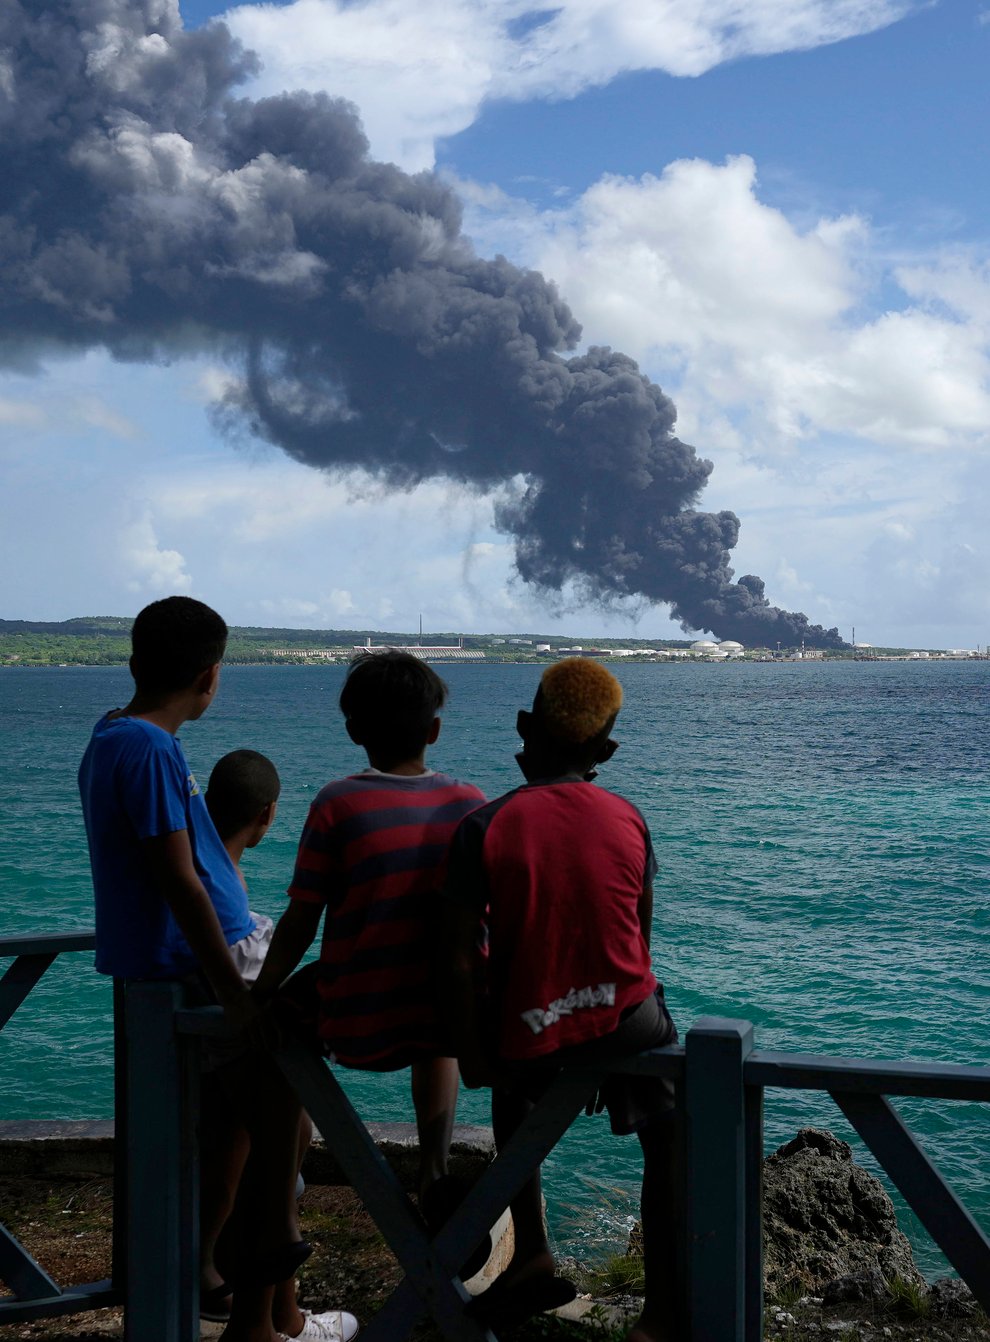 People watch a huge plume of smoke caused by a blaze after lightning struck an oil storage tank in Cuba (Ramon Espinosa/AP)